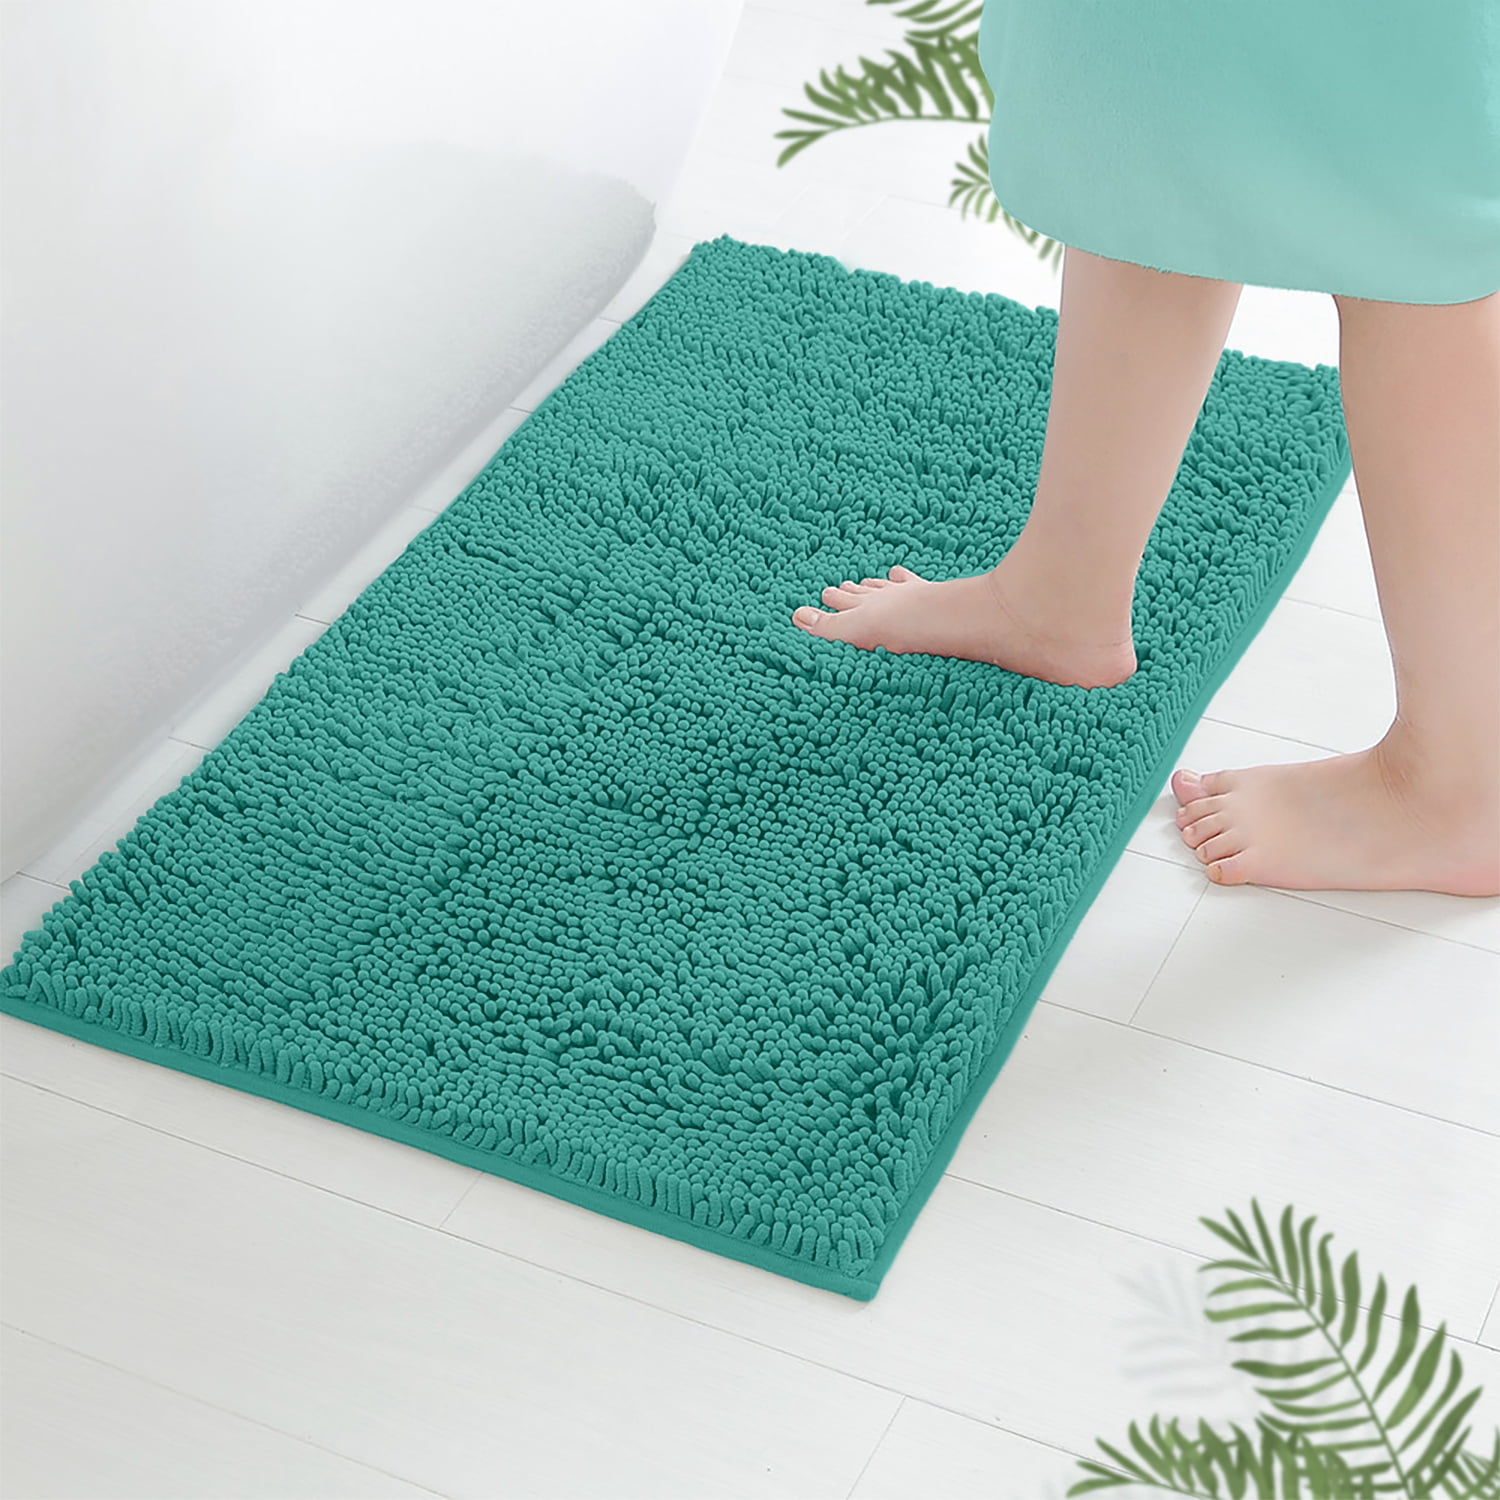 Hyhyco Upgraded Version Turquoise Bathroom Rugs 17x24,Bath Mat Non  Slip,Microfiber Soft Absorbent Bathroom Floor Mat,Machine Washable & Comes  with